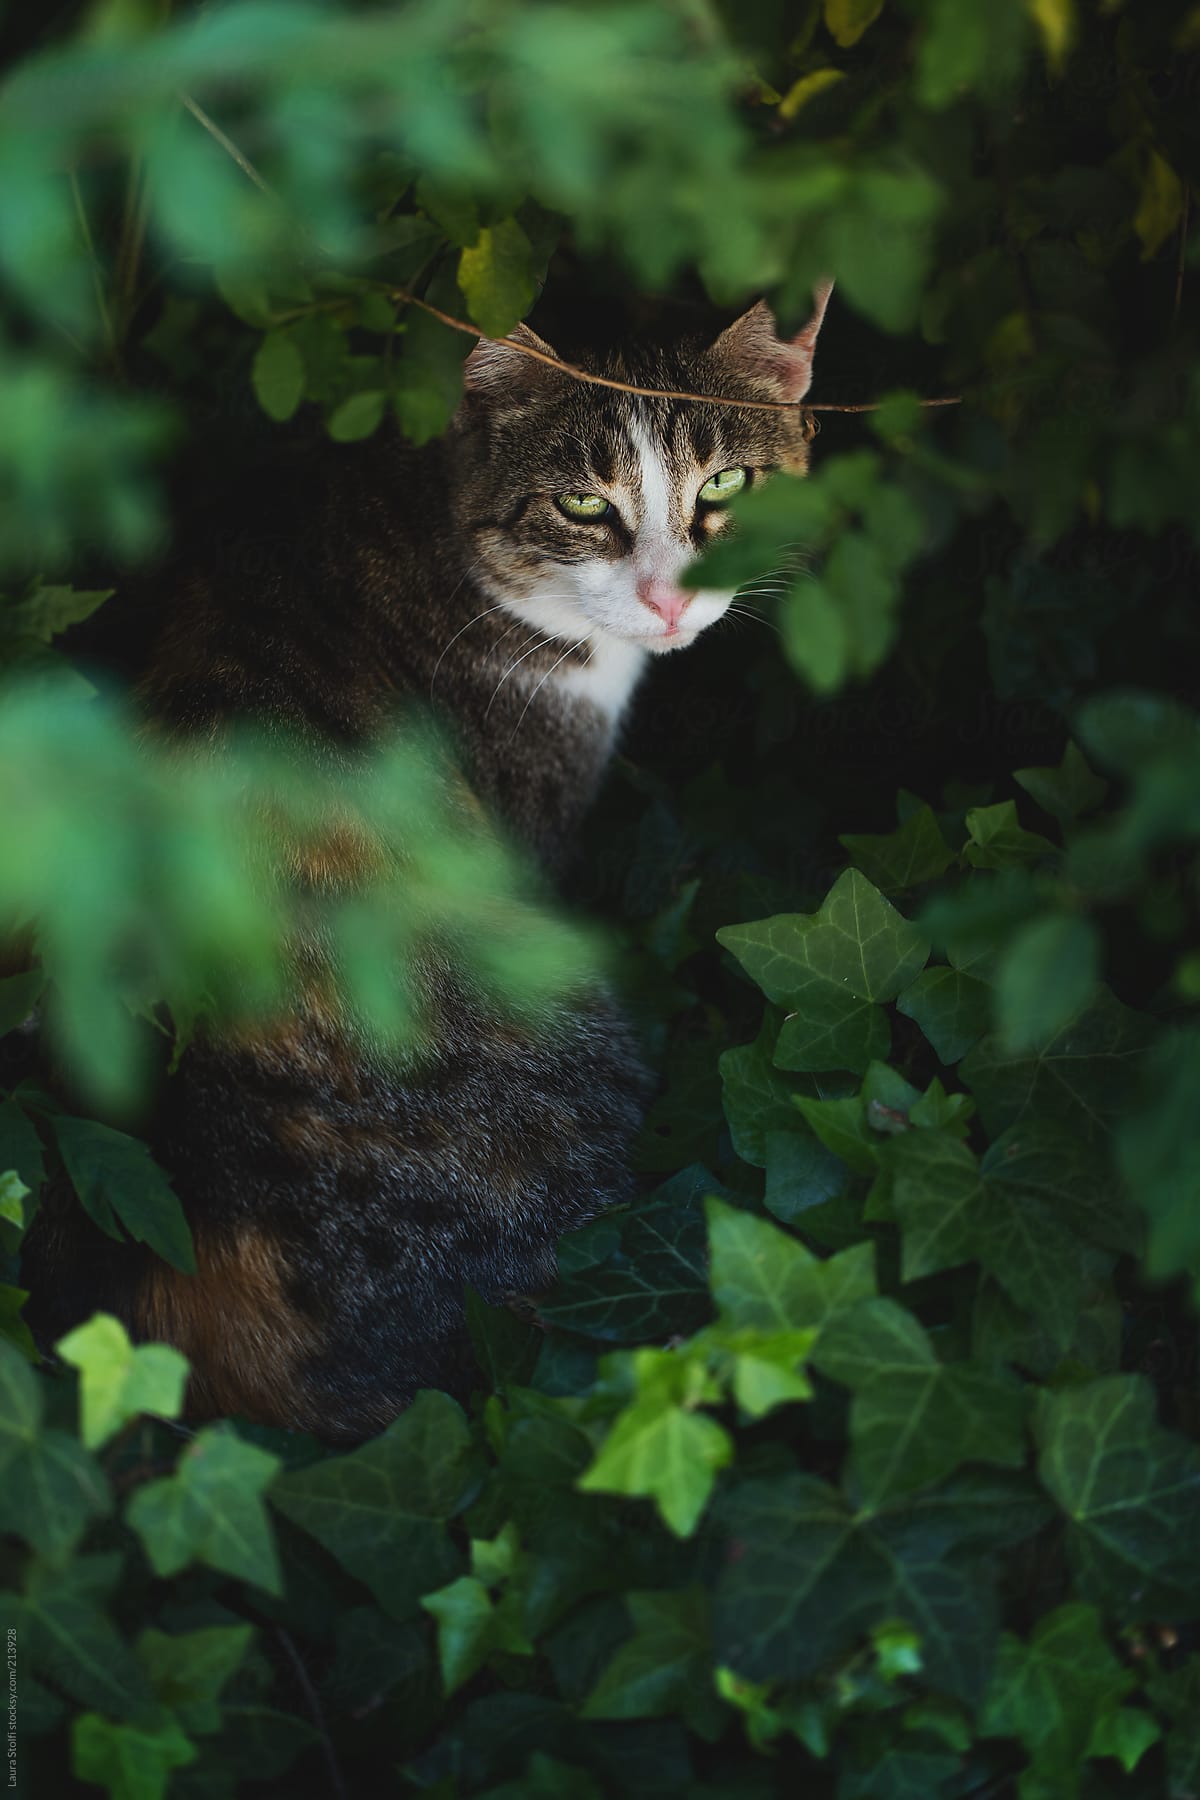 Cat sitting in the shadow under bushes and looking straight at the camera